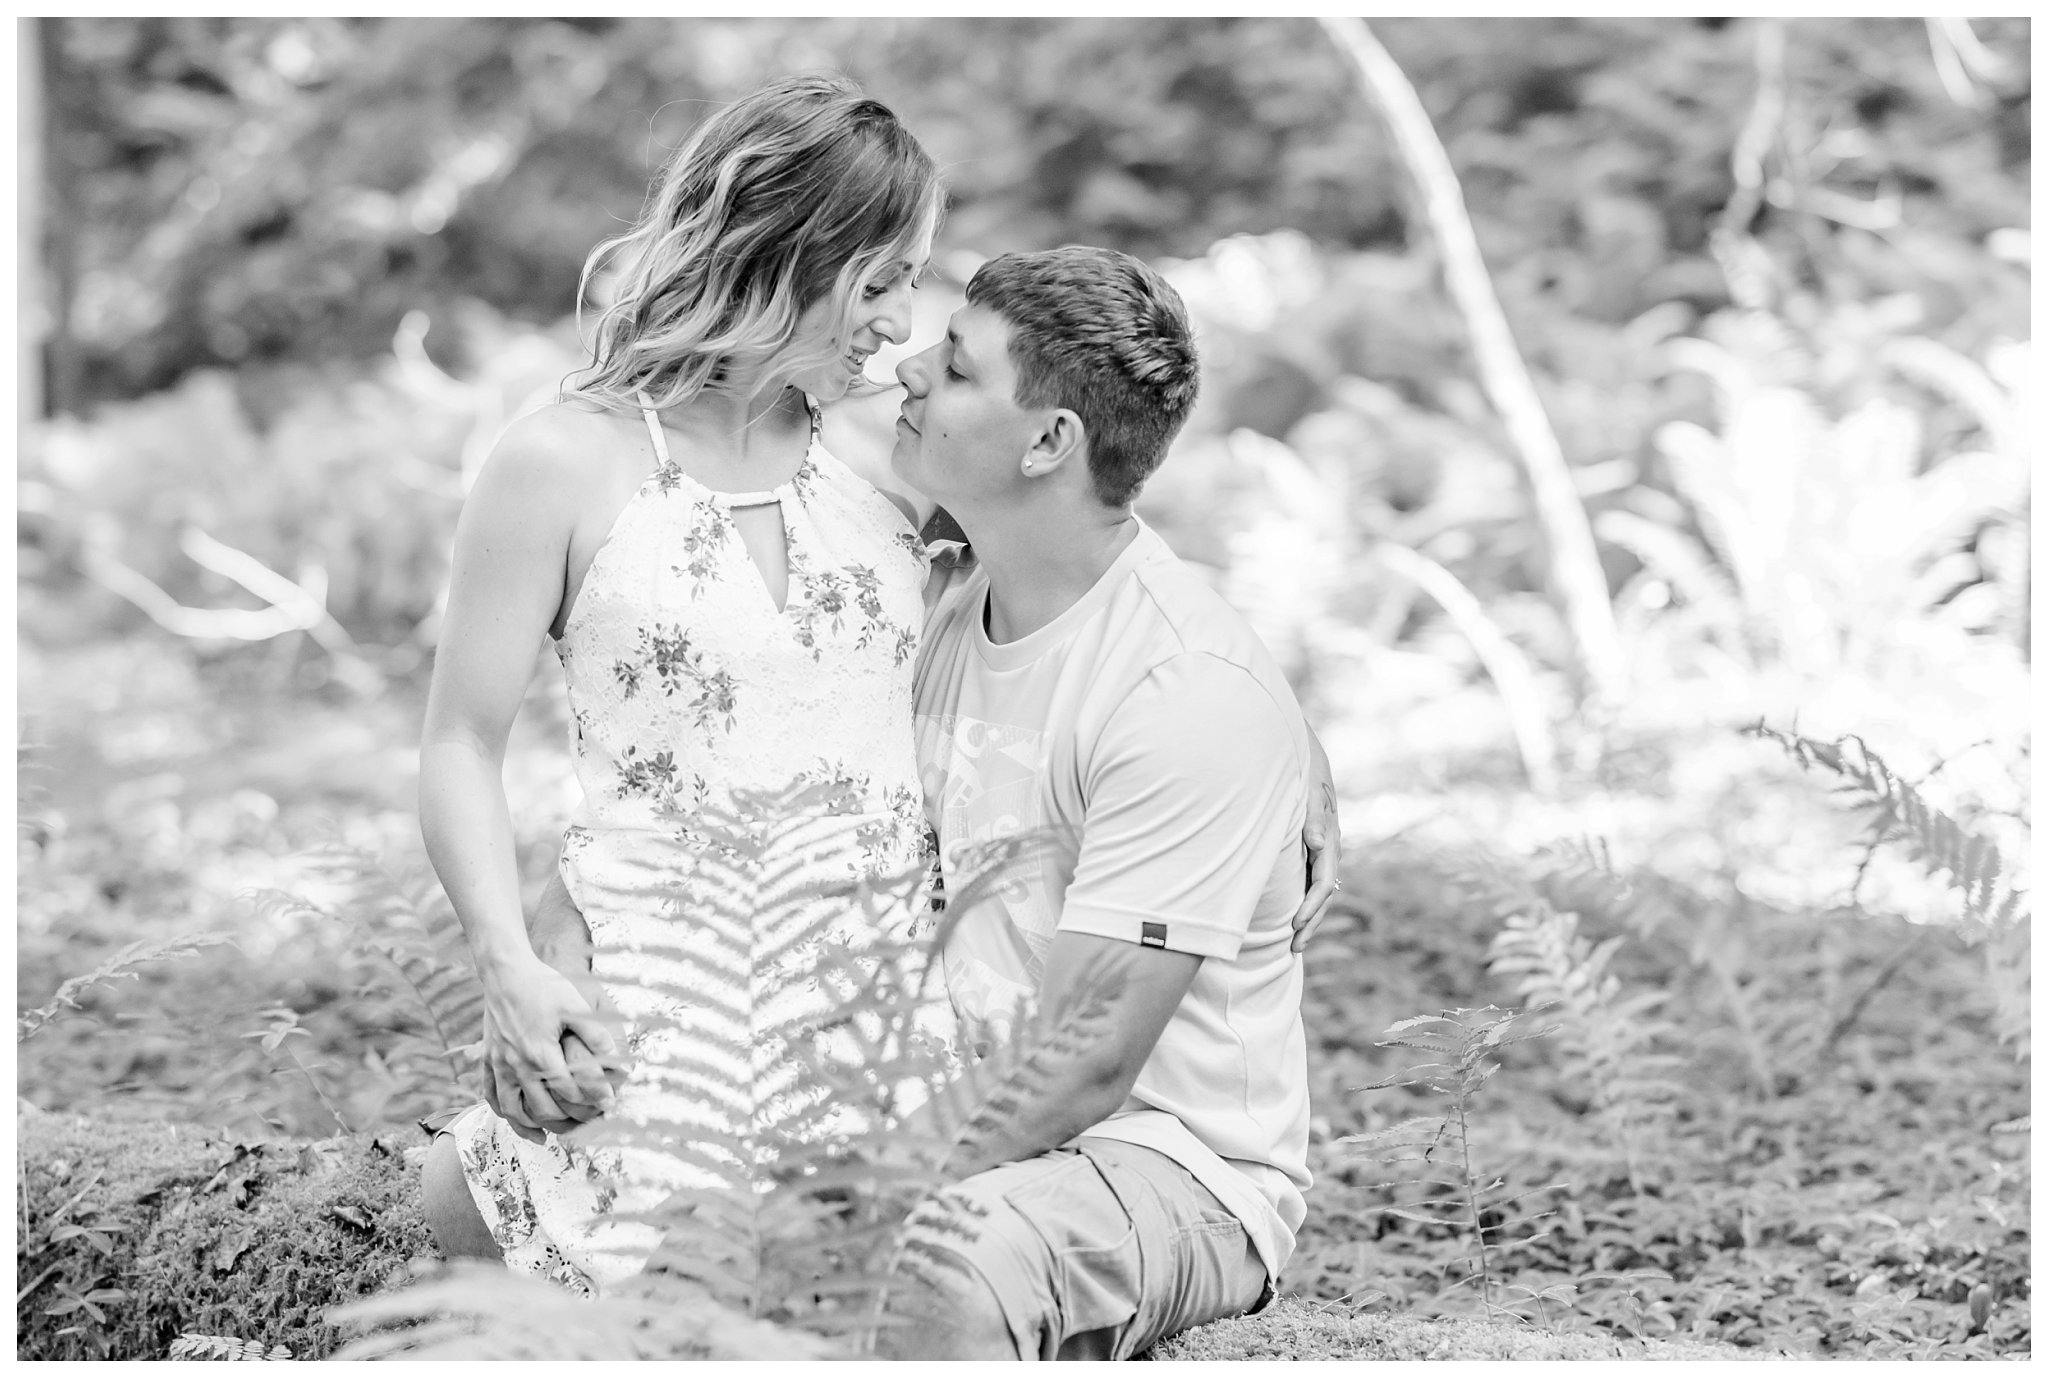 Joanna Young Photography Elizabeth and Cody Engagement Session_0008.jpg